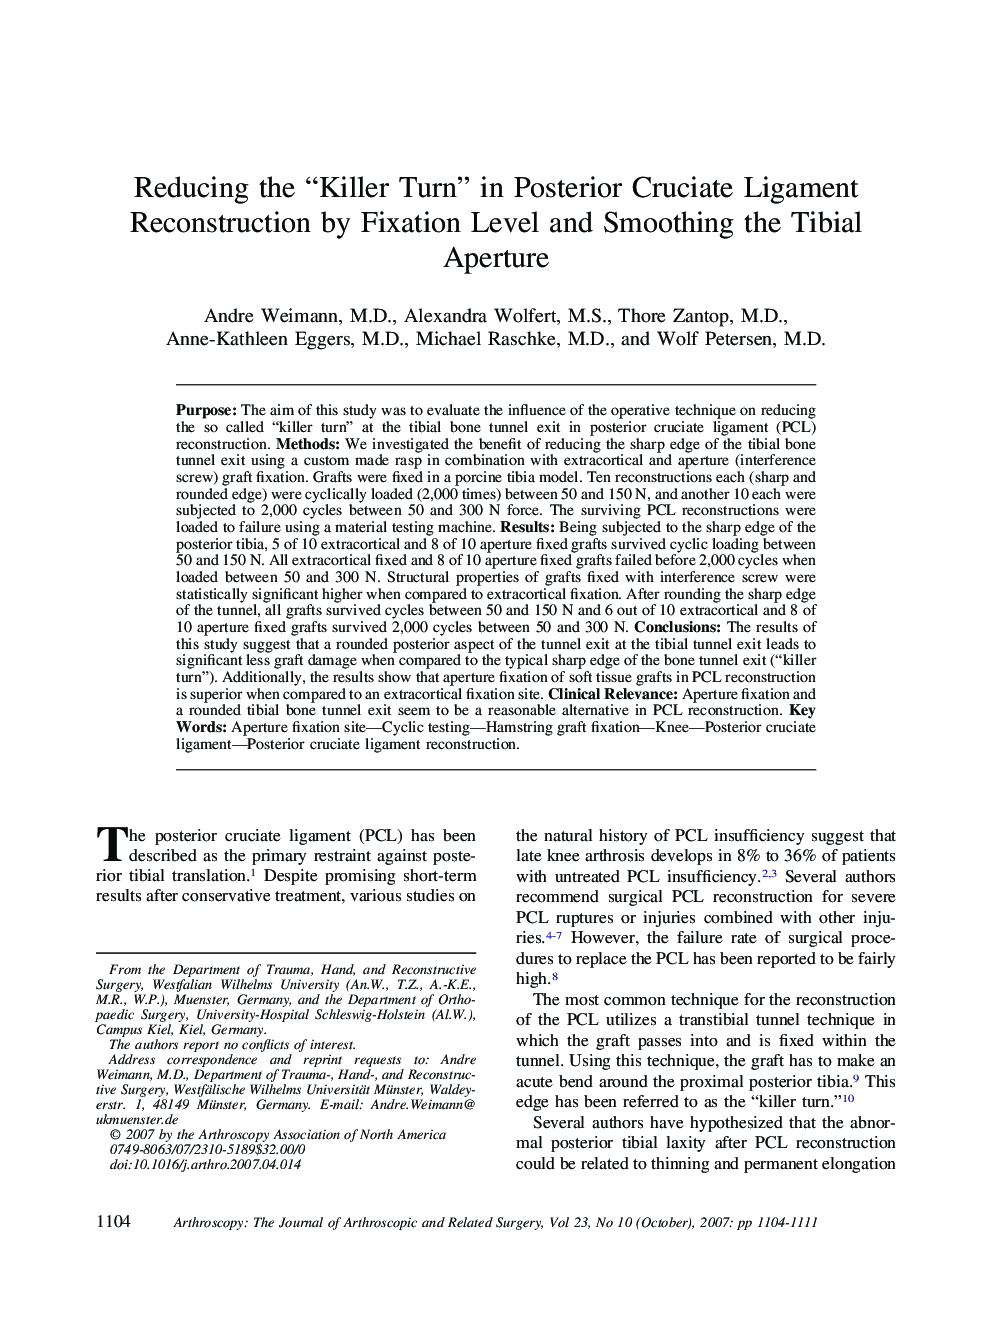 Reducing the “Killer Turn” in Posterior Cruciate Ligament Reconstruction by Fixation Level and Smoothing the Tibial Aperture 